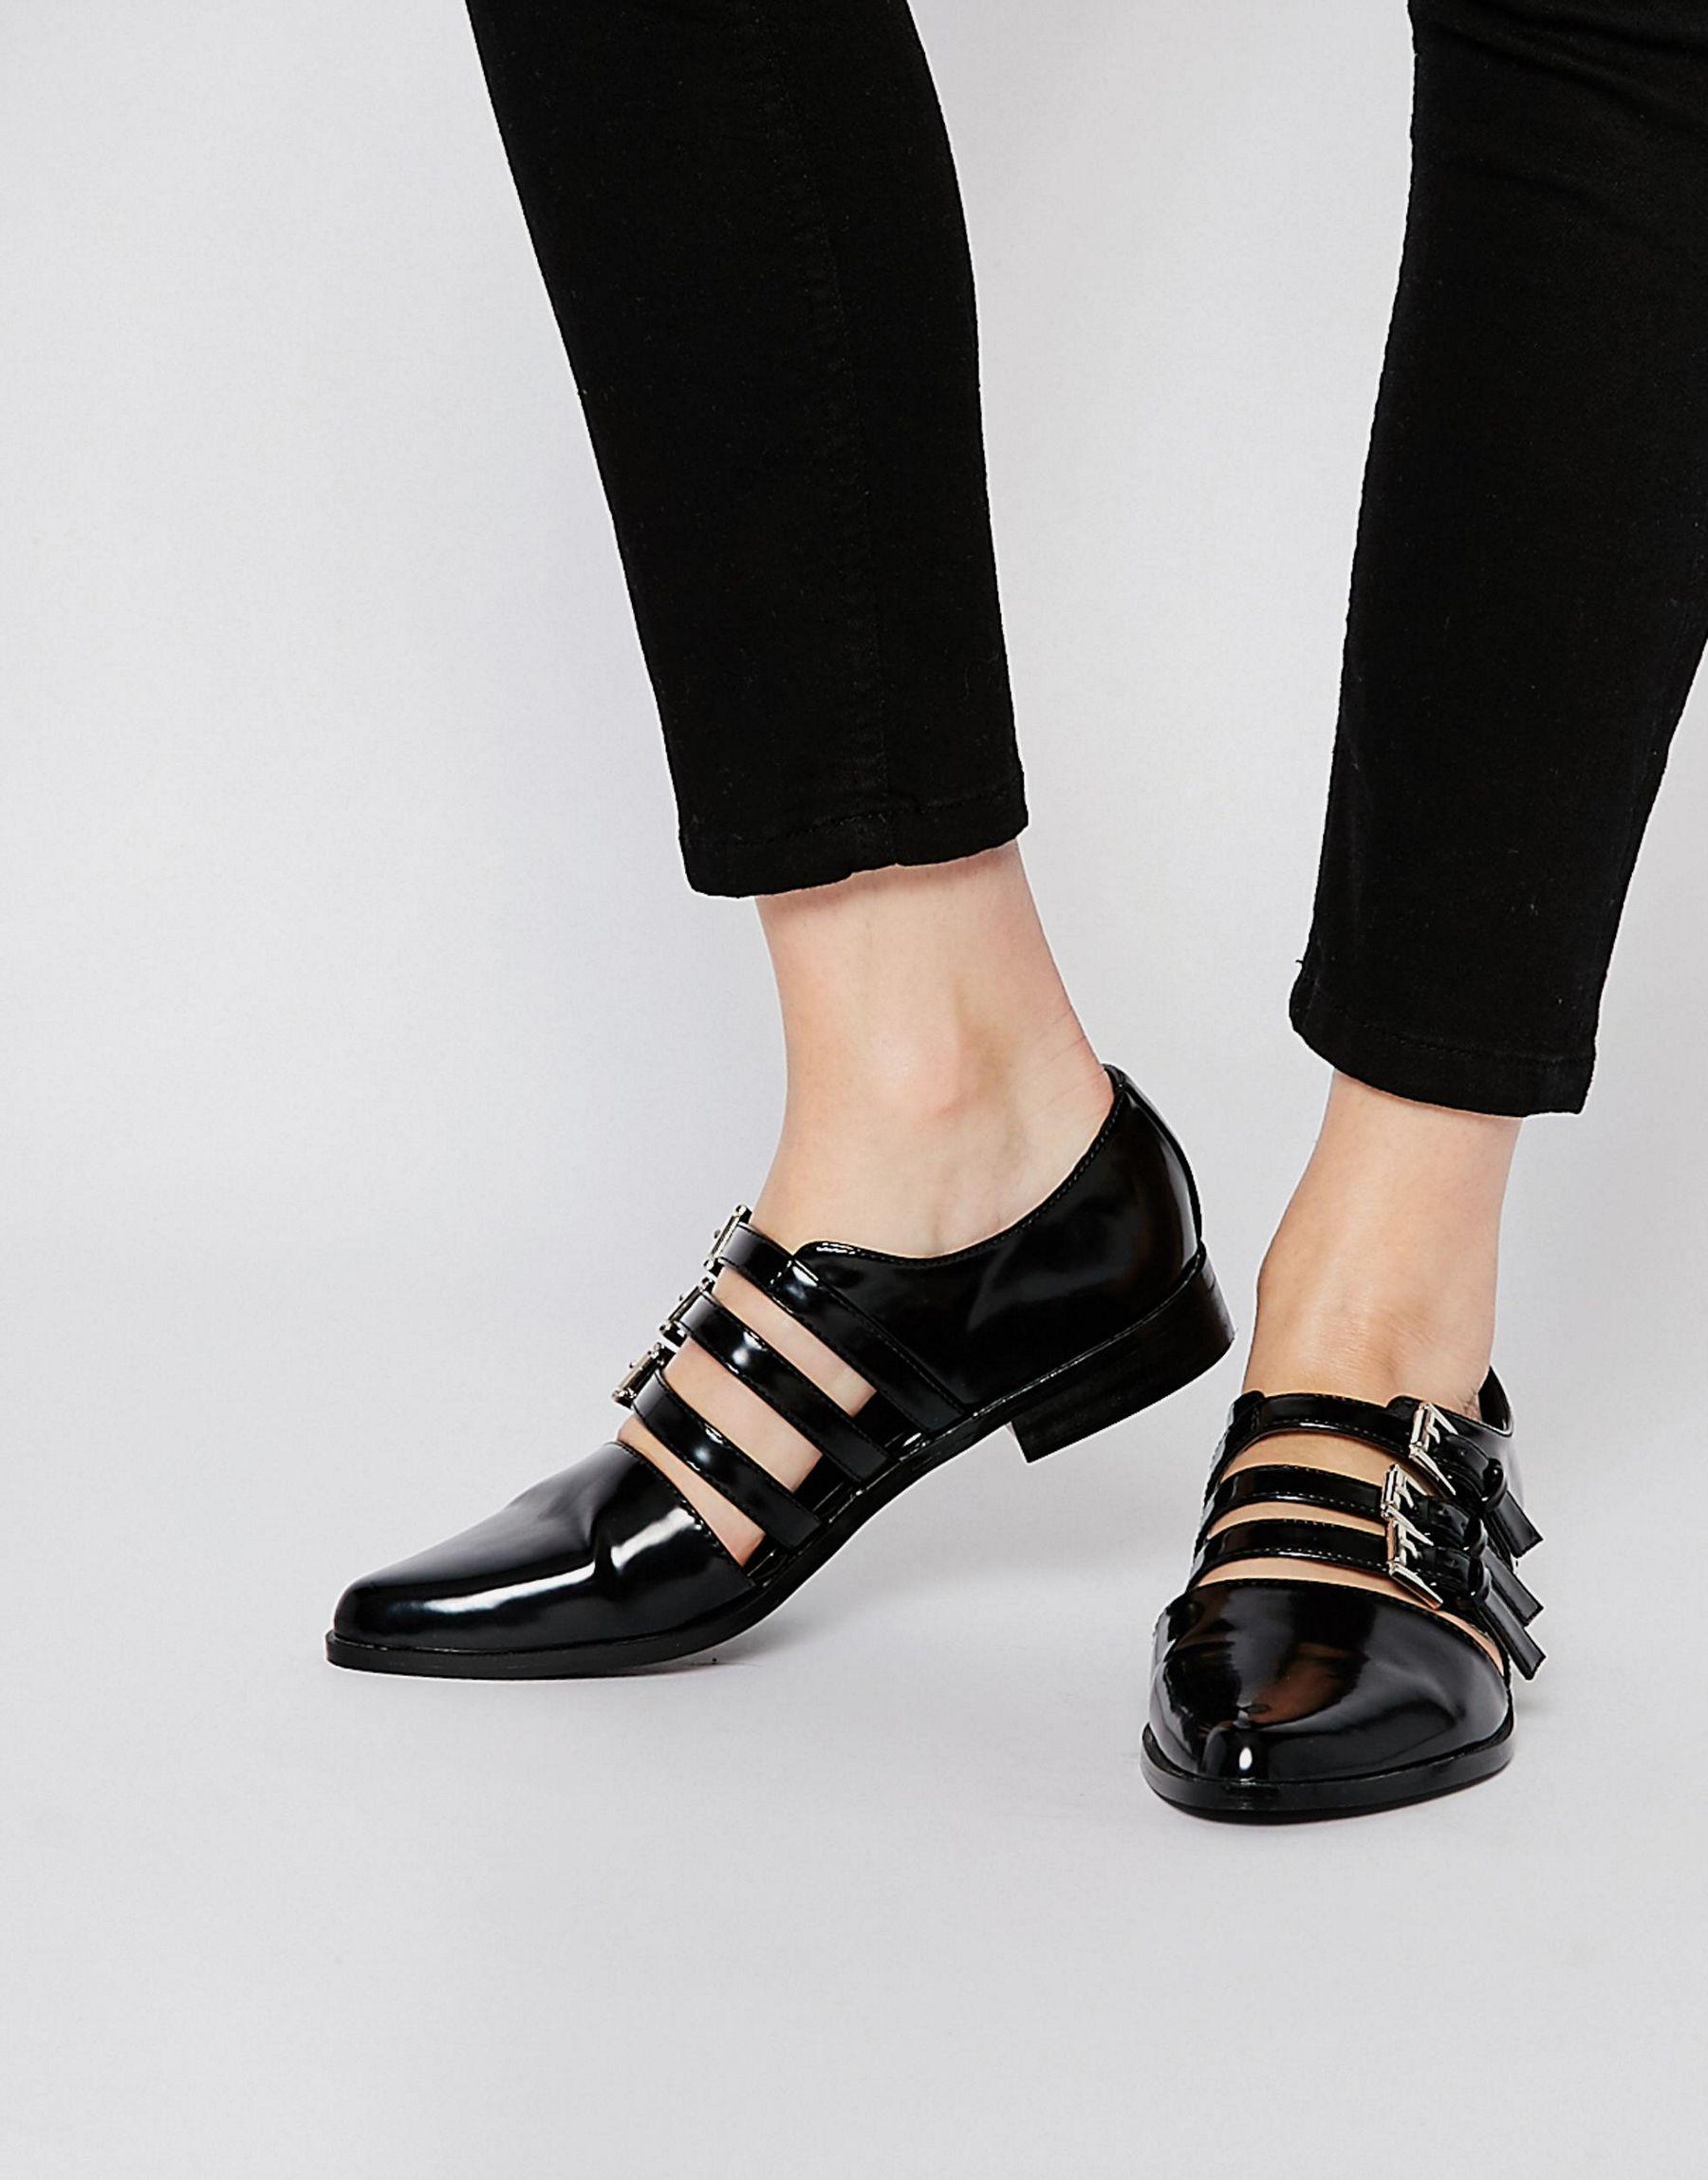 ASOS Leather Magic Trick Flat Shoes in Black - Lyst